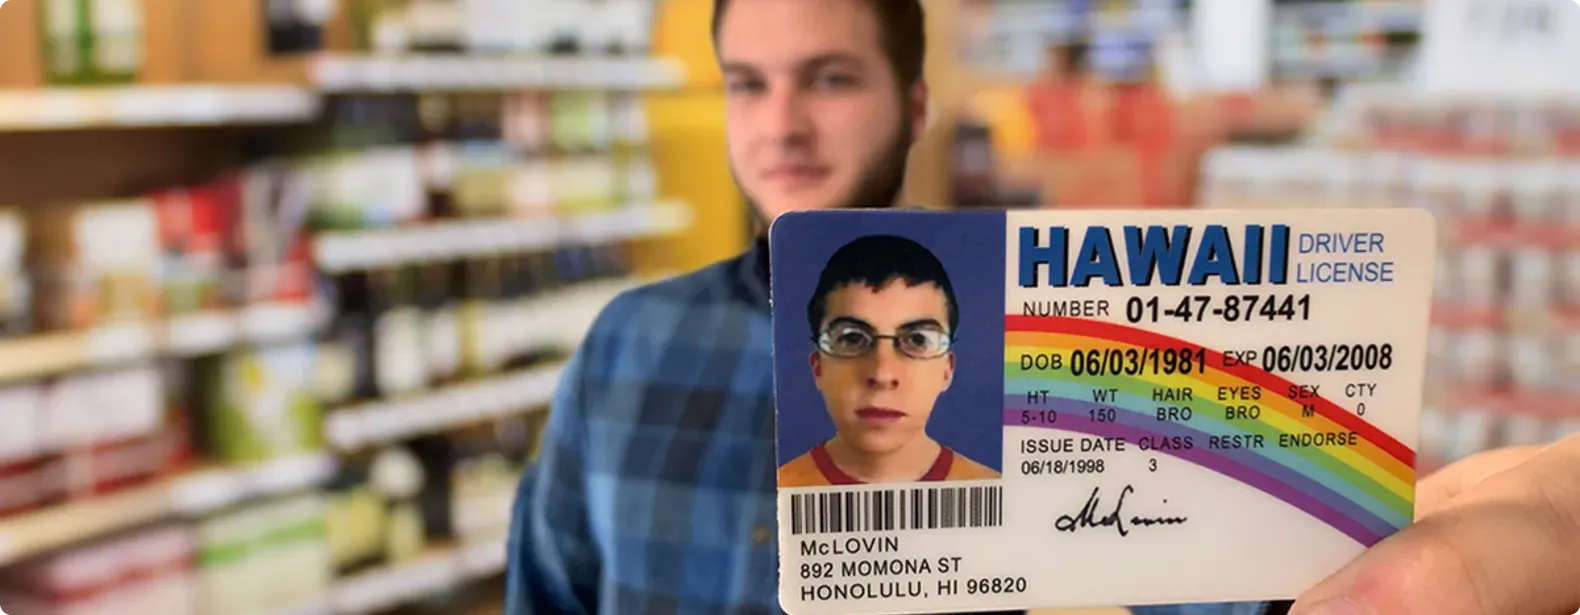 do fake ids work with scanners